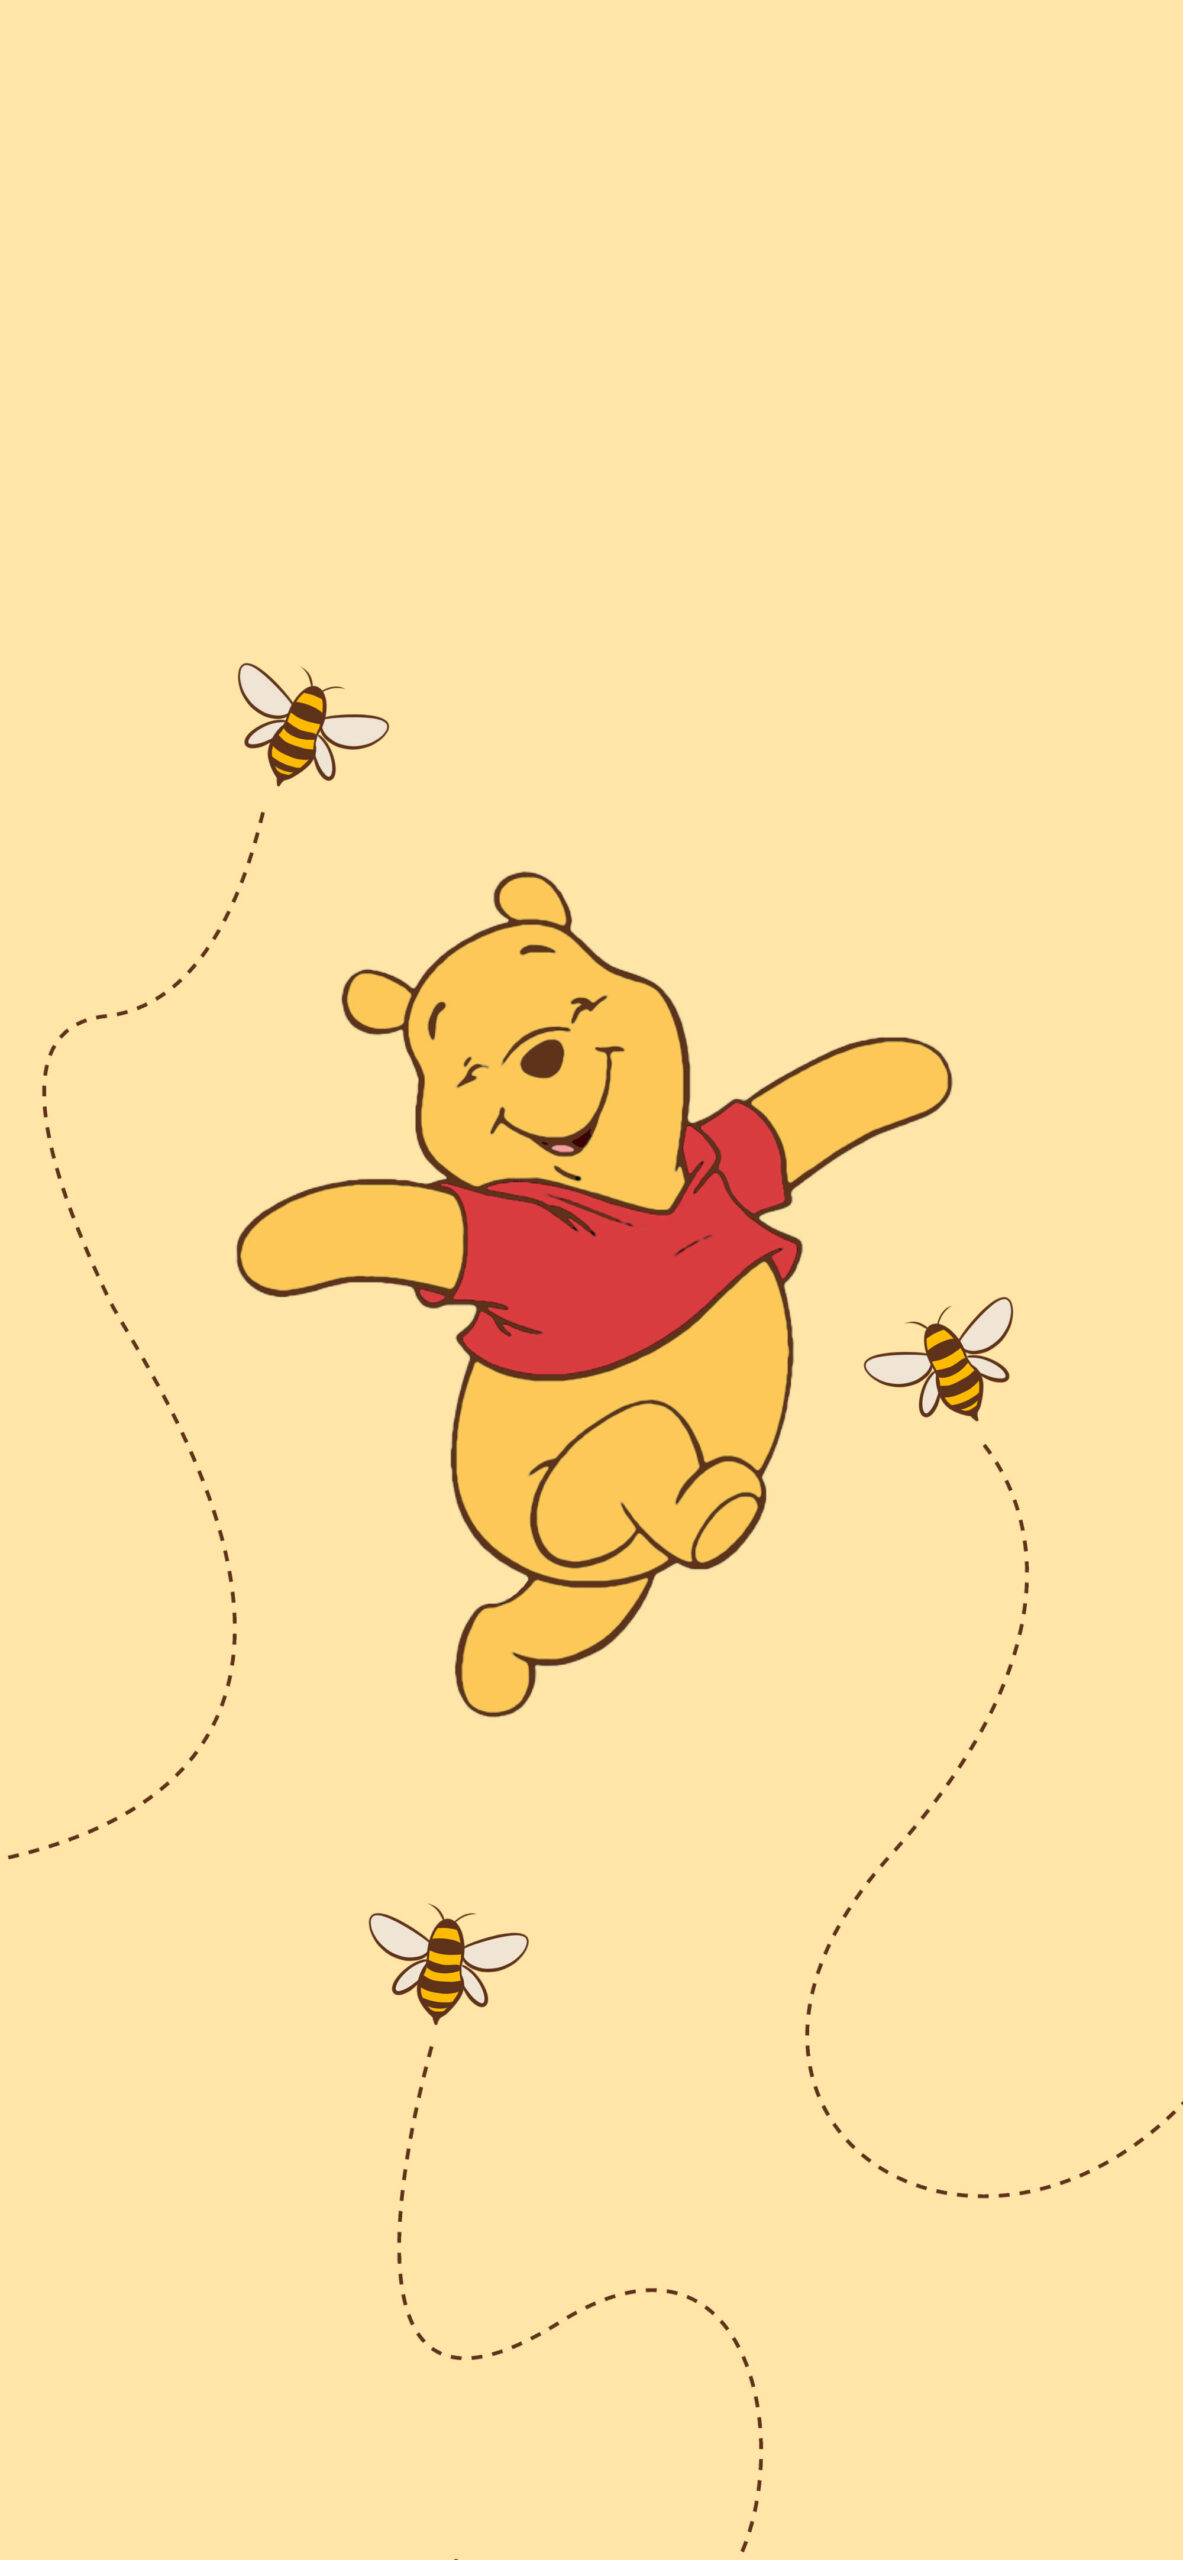 winnie the pooh bees yellow wallpaper